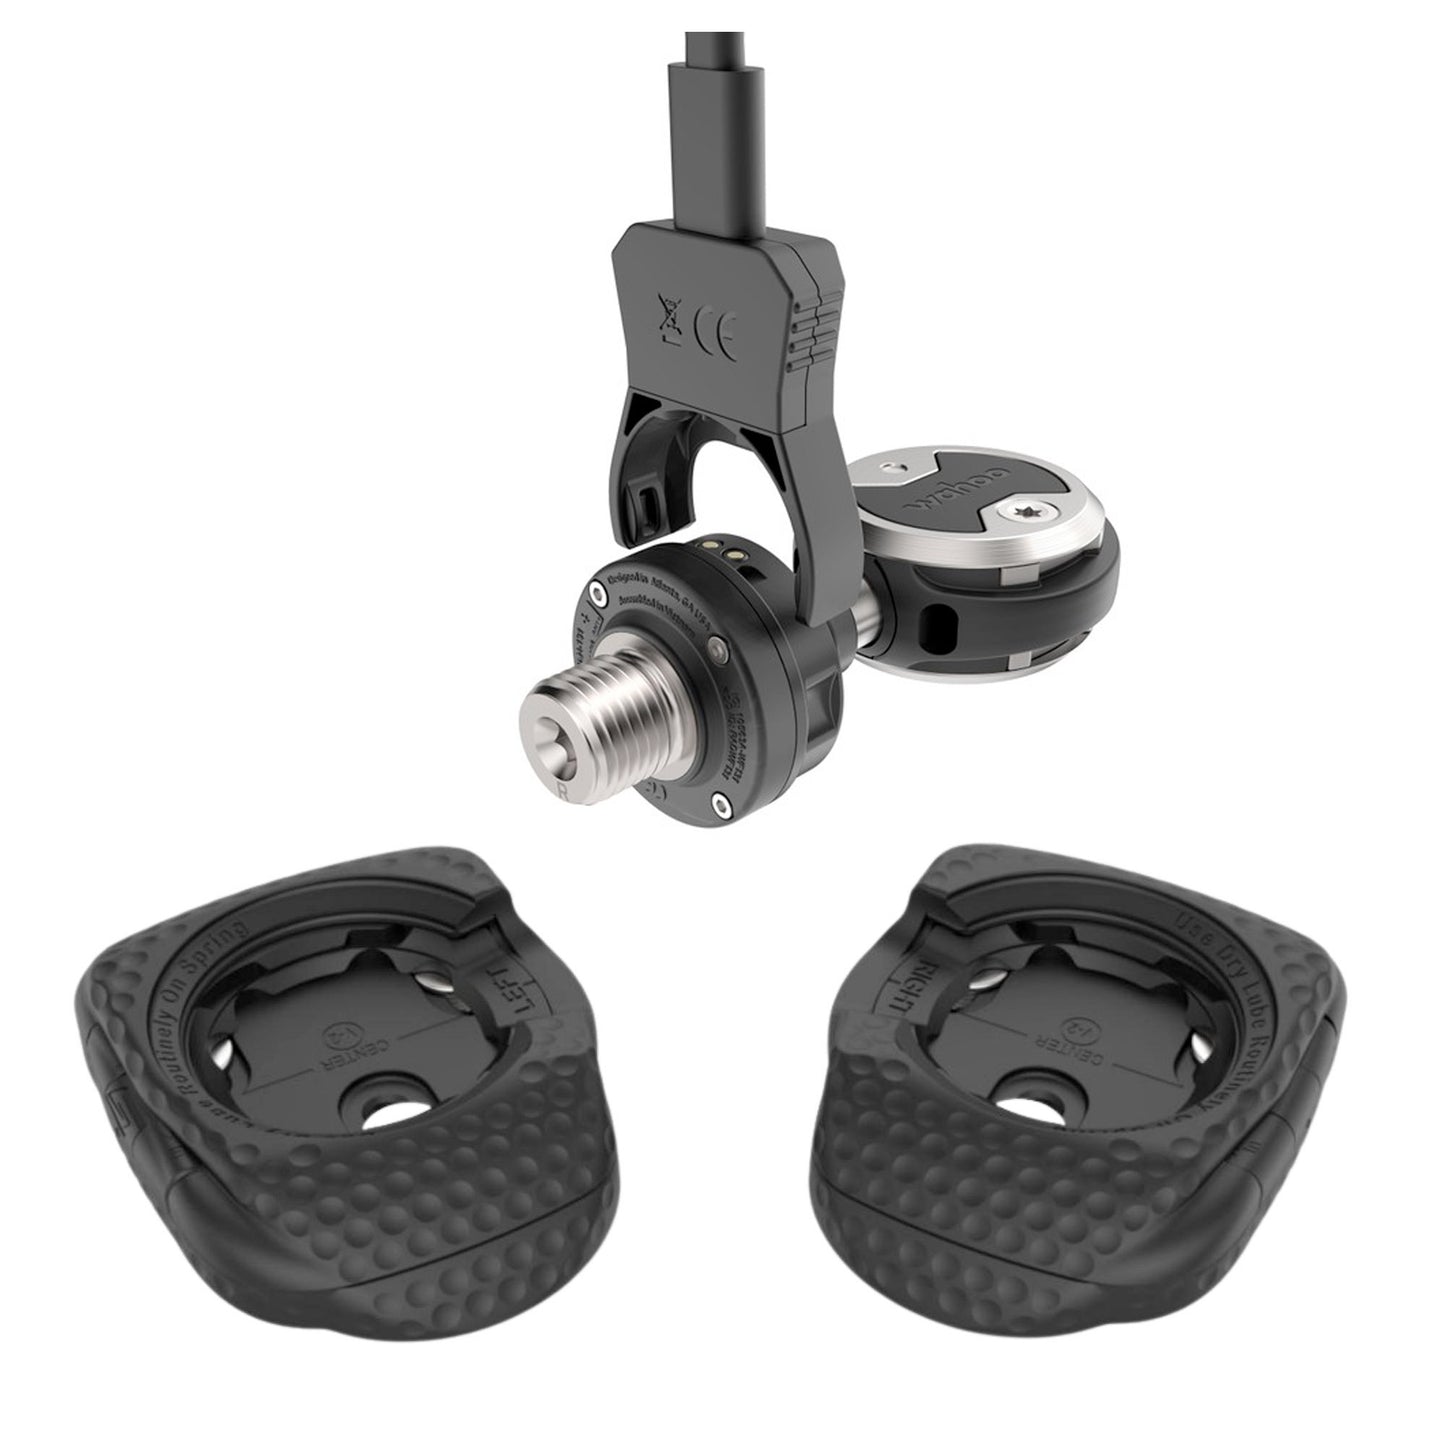 Wahoo Powrlink Zero Double Sided Power Pedals